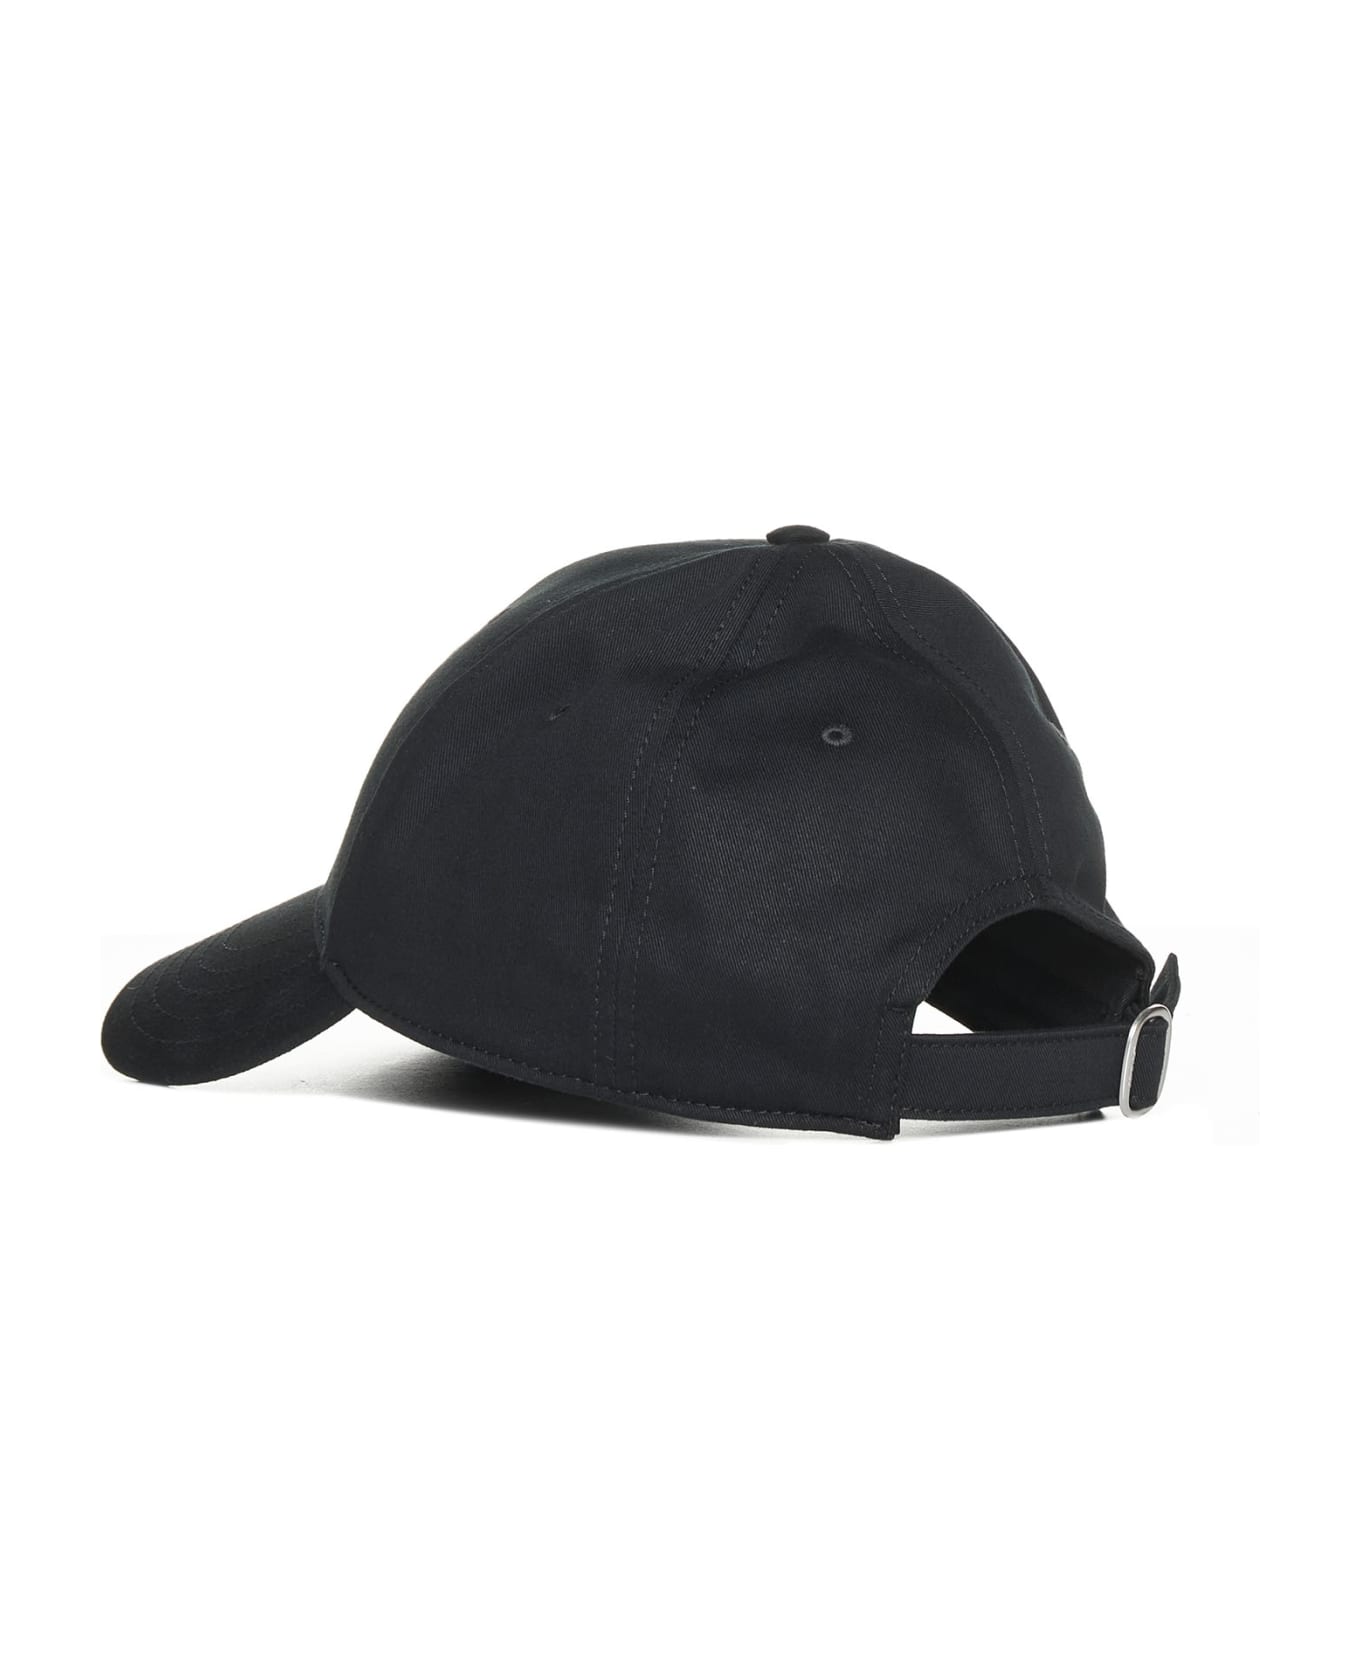 Off-White Baseball Cap With Embroidery - Black white